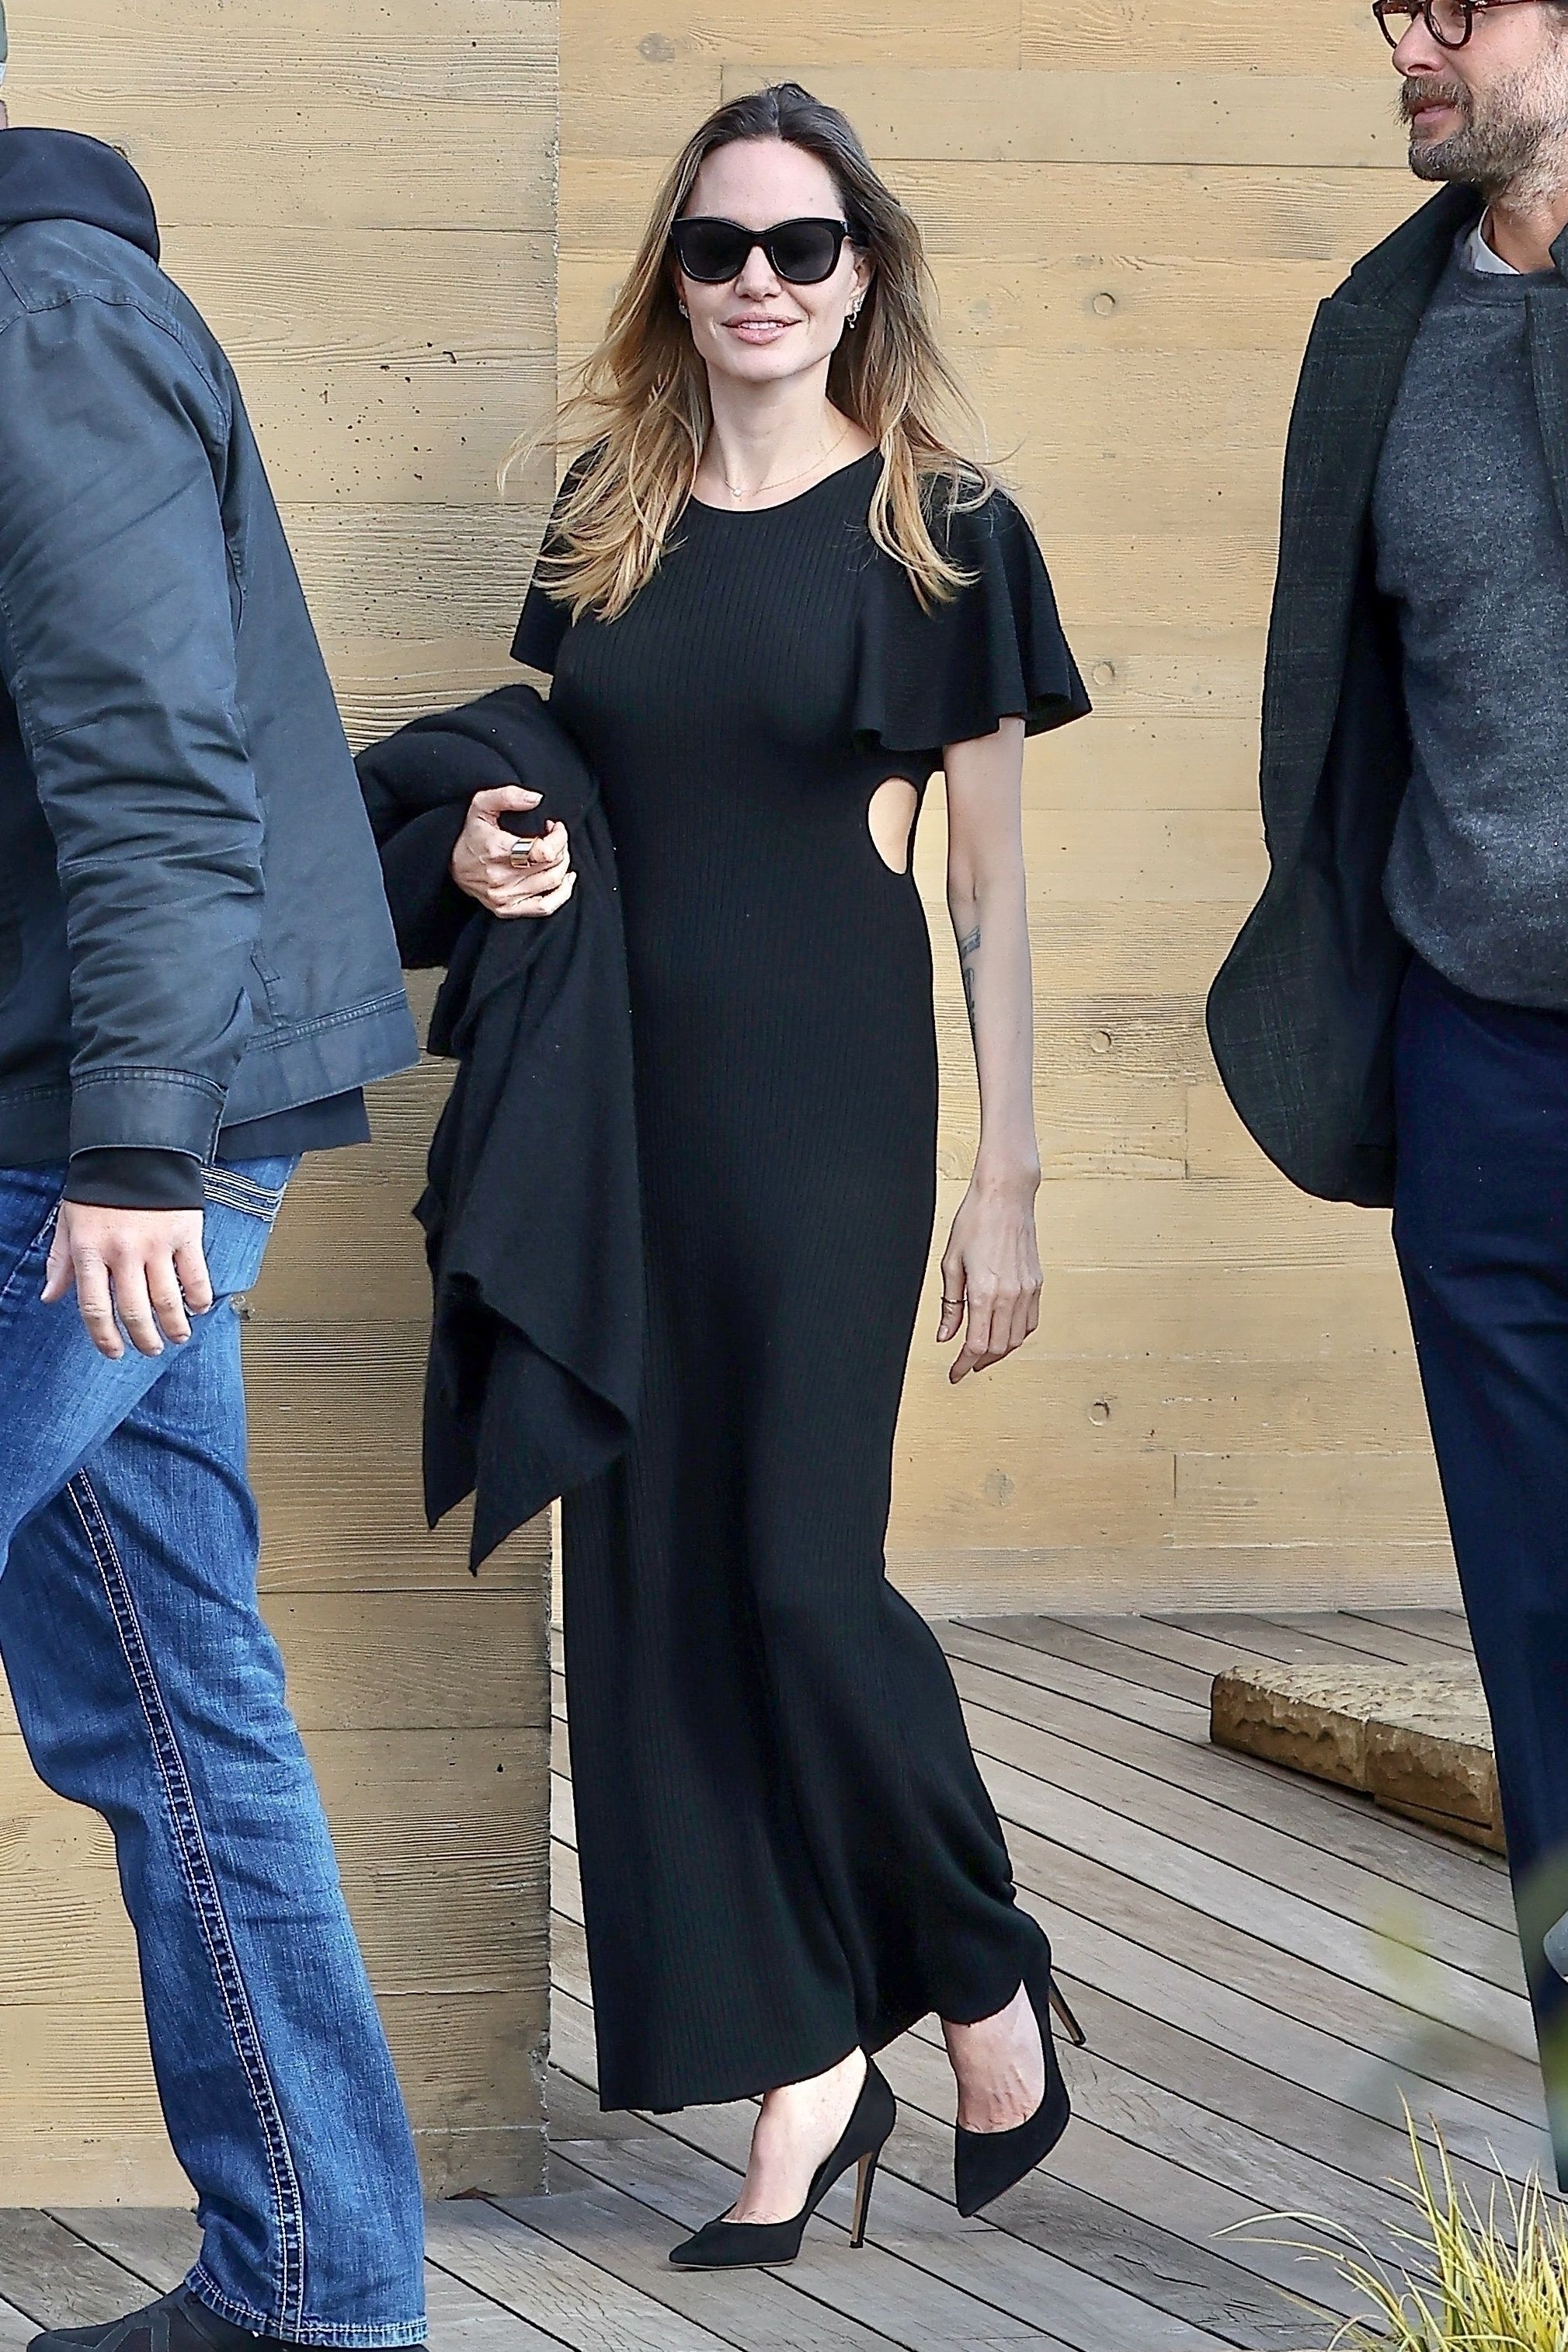 Angelina Jolie puts on a glamorous display in a black maxi dress